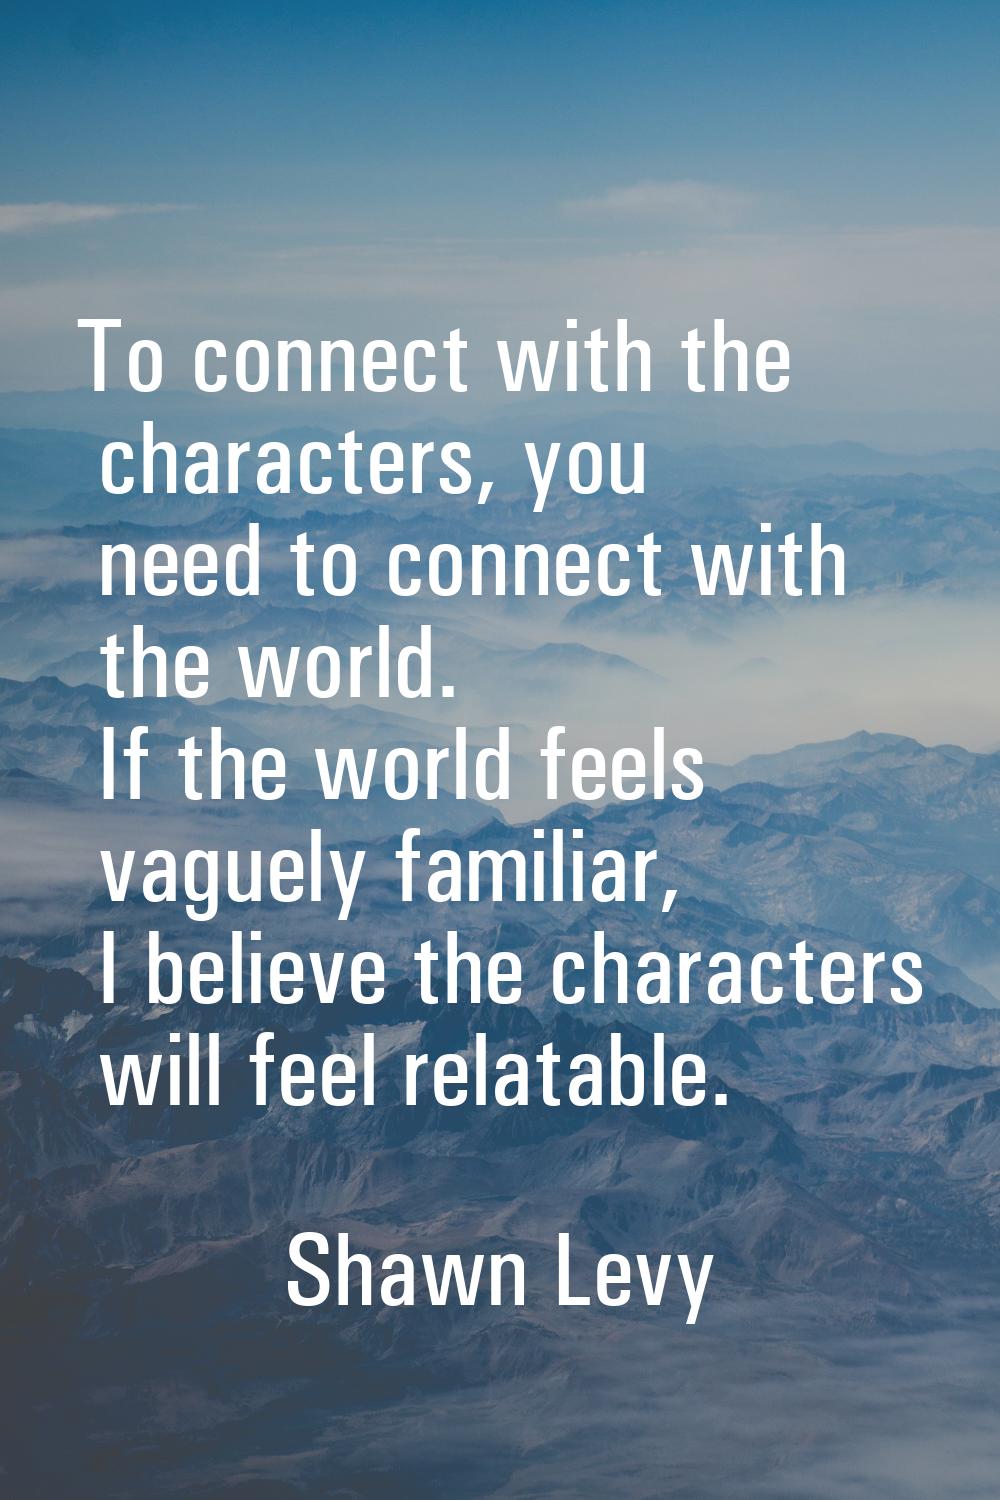 To connect with the characters, you need to connect with the world. If the world feels vaguely fami